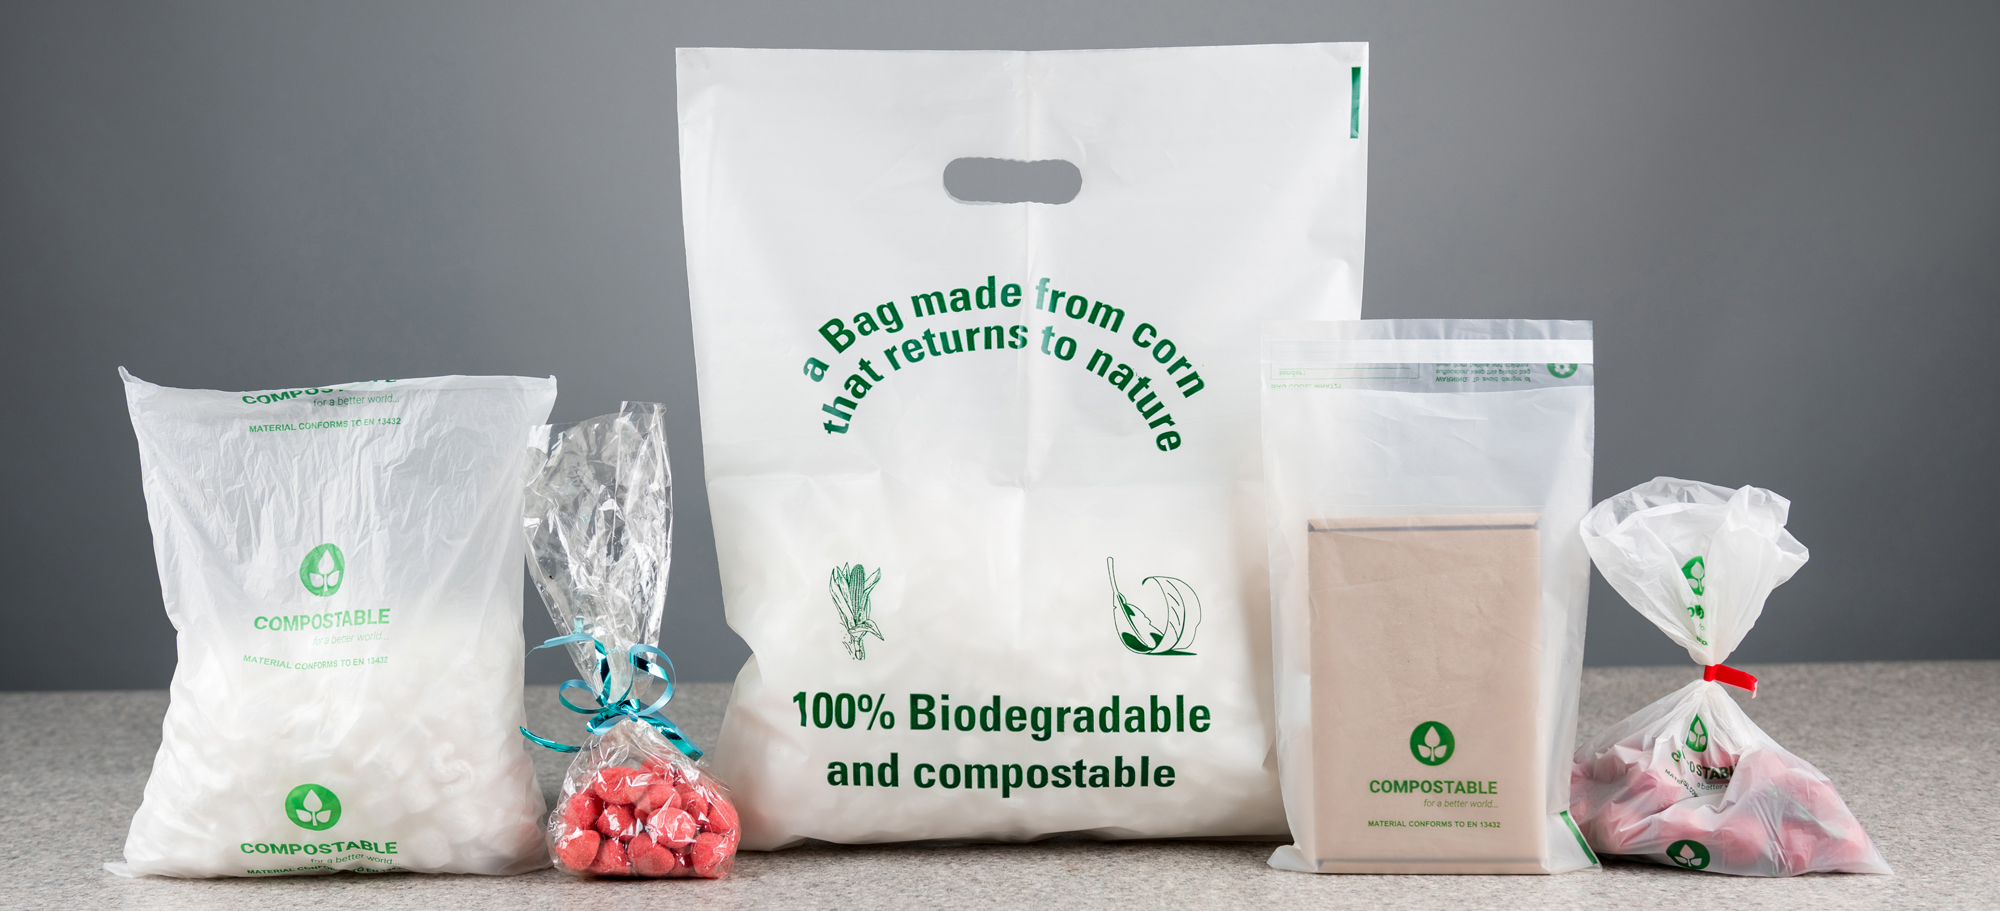 For commercial bag manufacture and production,UK